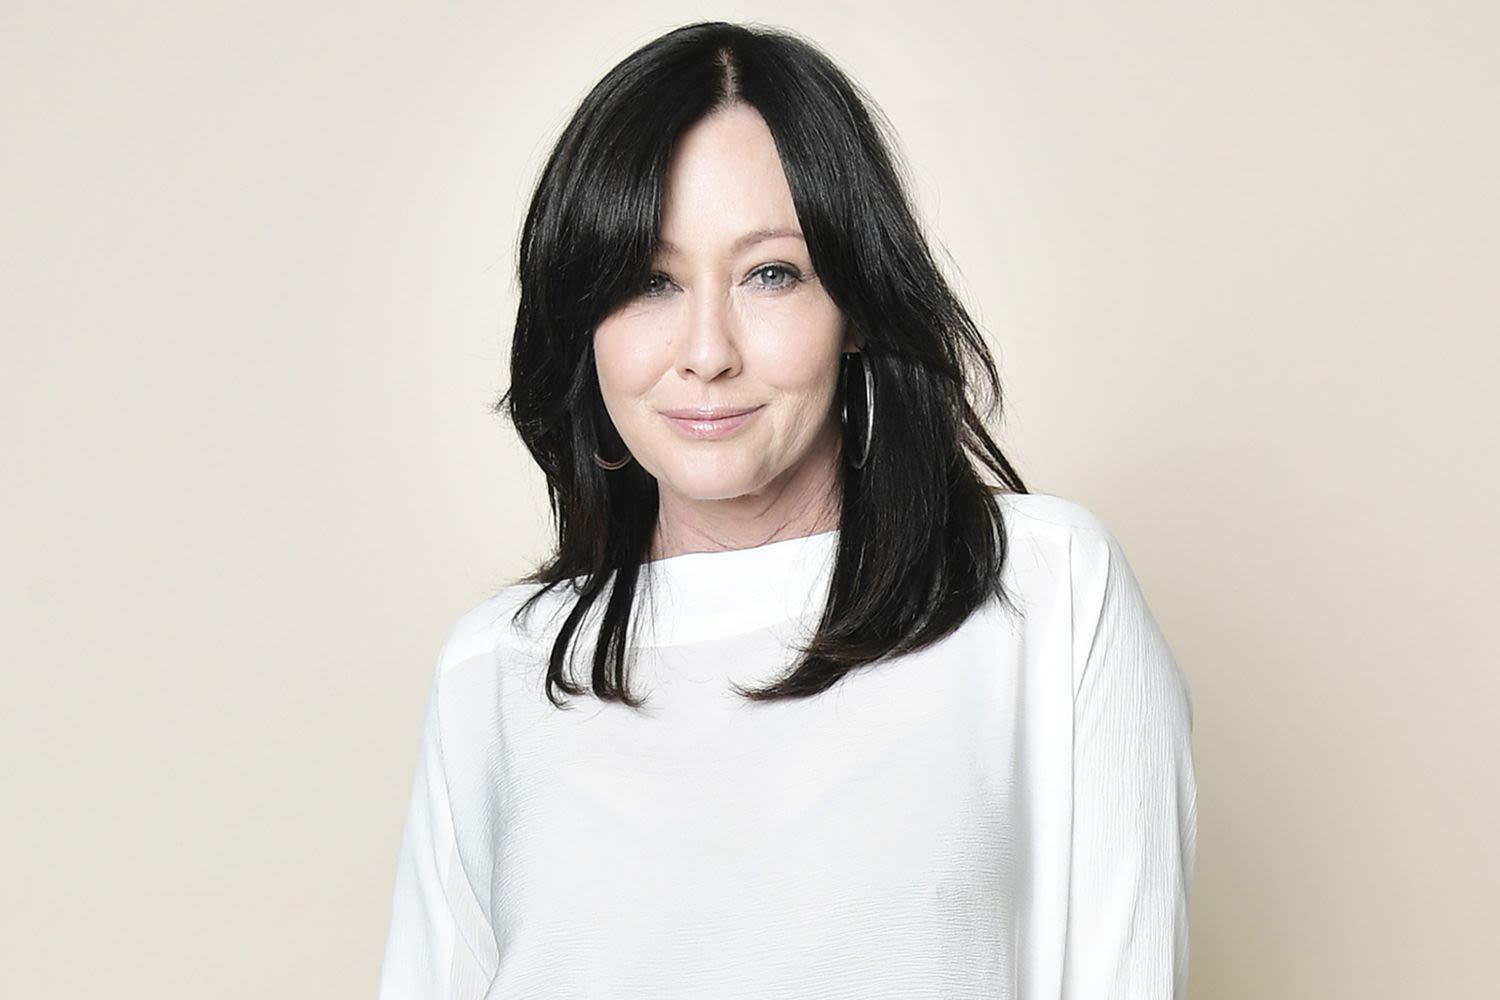 Shannen Doherty Recalls Being 'Gaslighted' in 'Bad Relationships,' Says 1 Ex's Lack of Respect Led to 'Many, Many Affairs'